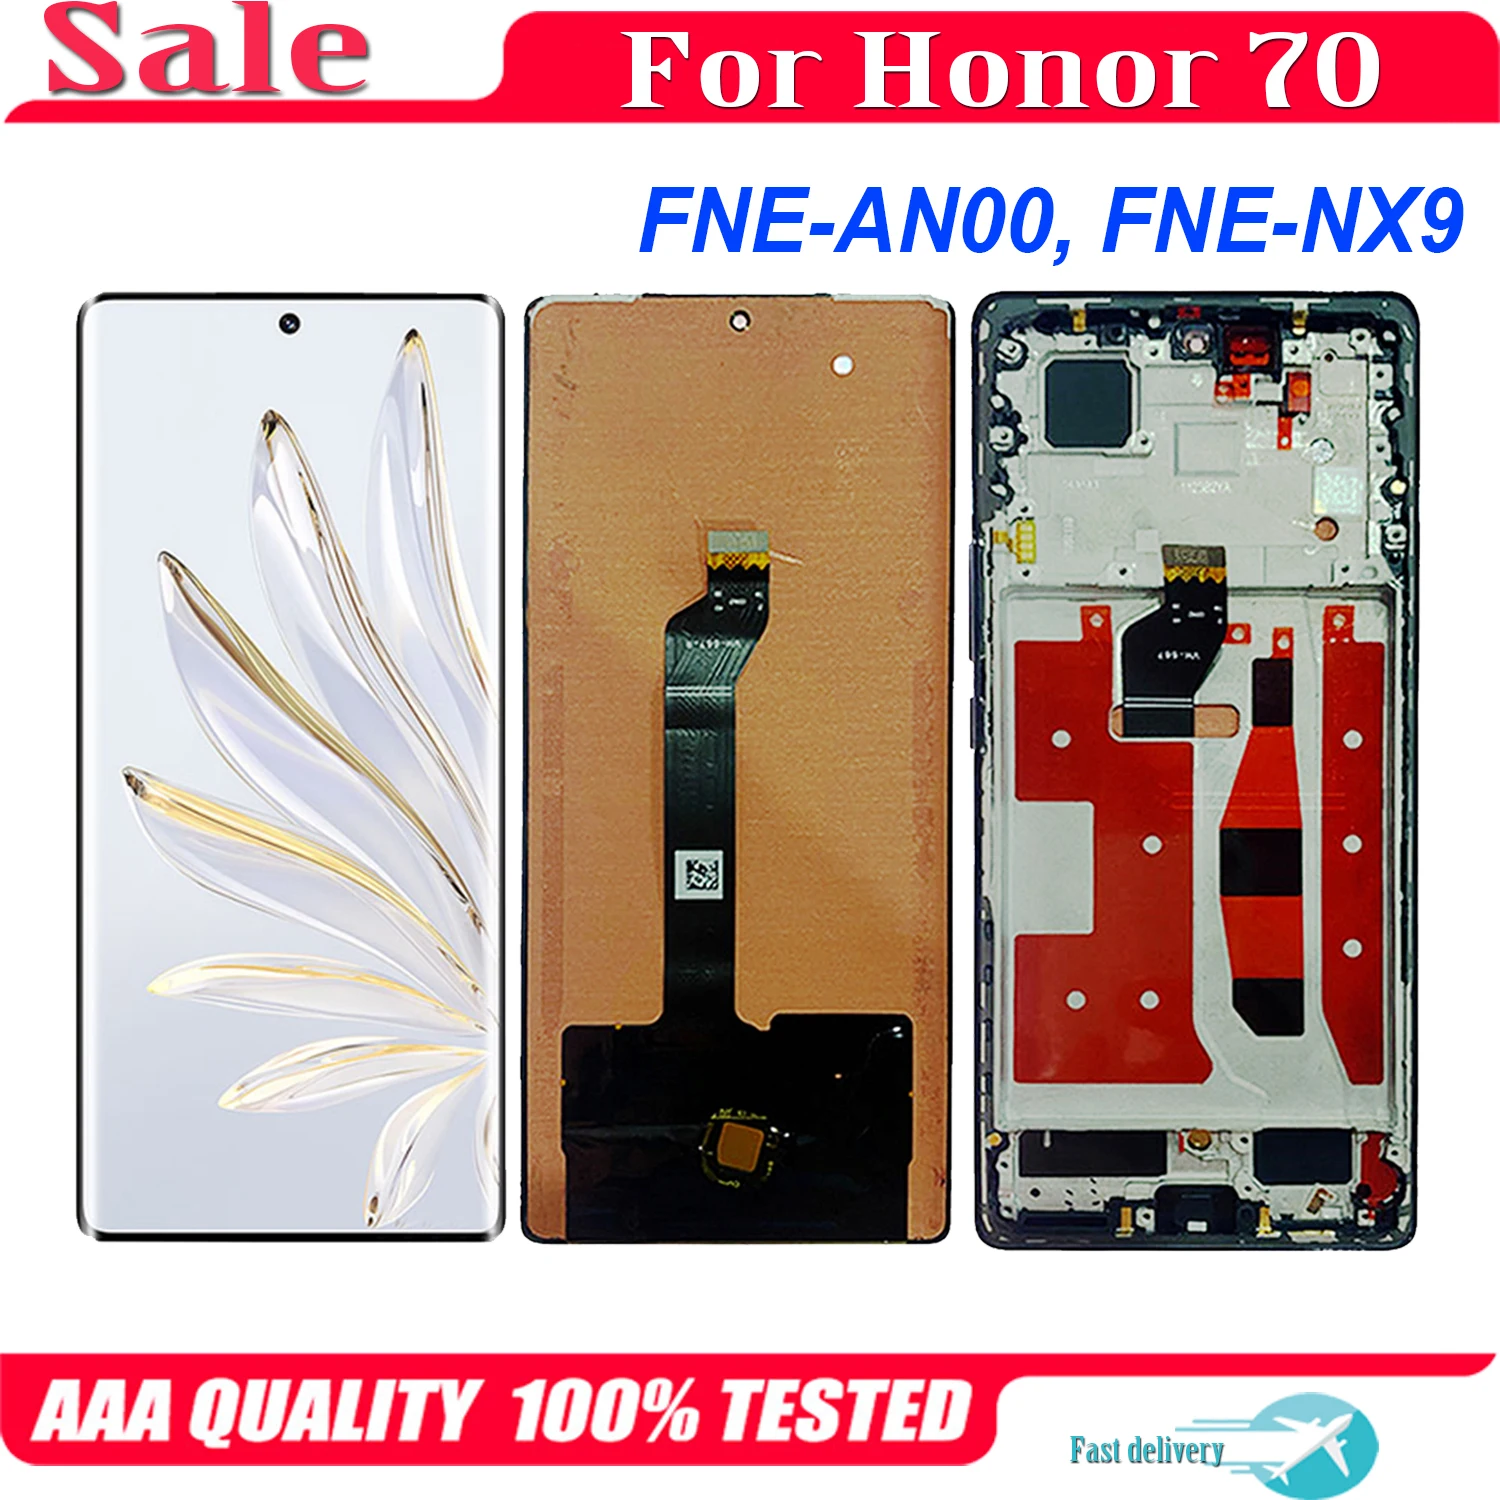 Original 6.67'' OLED For Huawei Honor 70 FNE-AN00 FNE-NX9 LCD Display Touch Screen Digitizer Assembly For Honor70 LCD enlarge